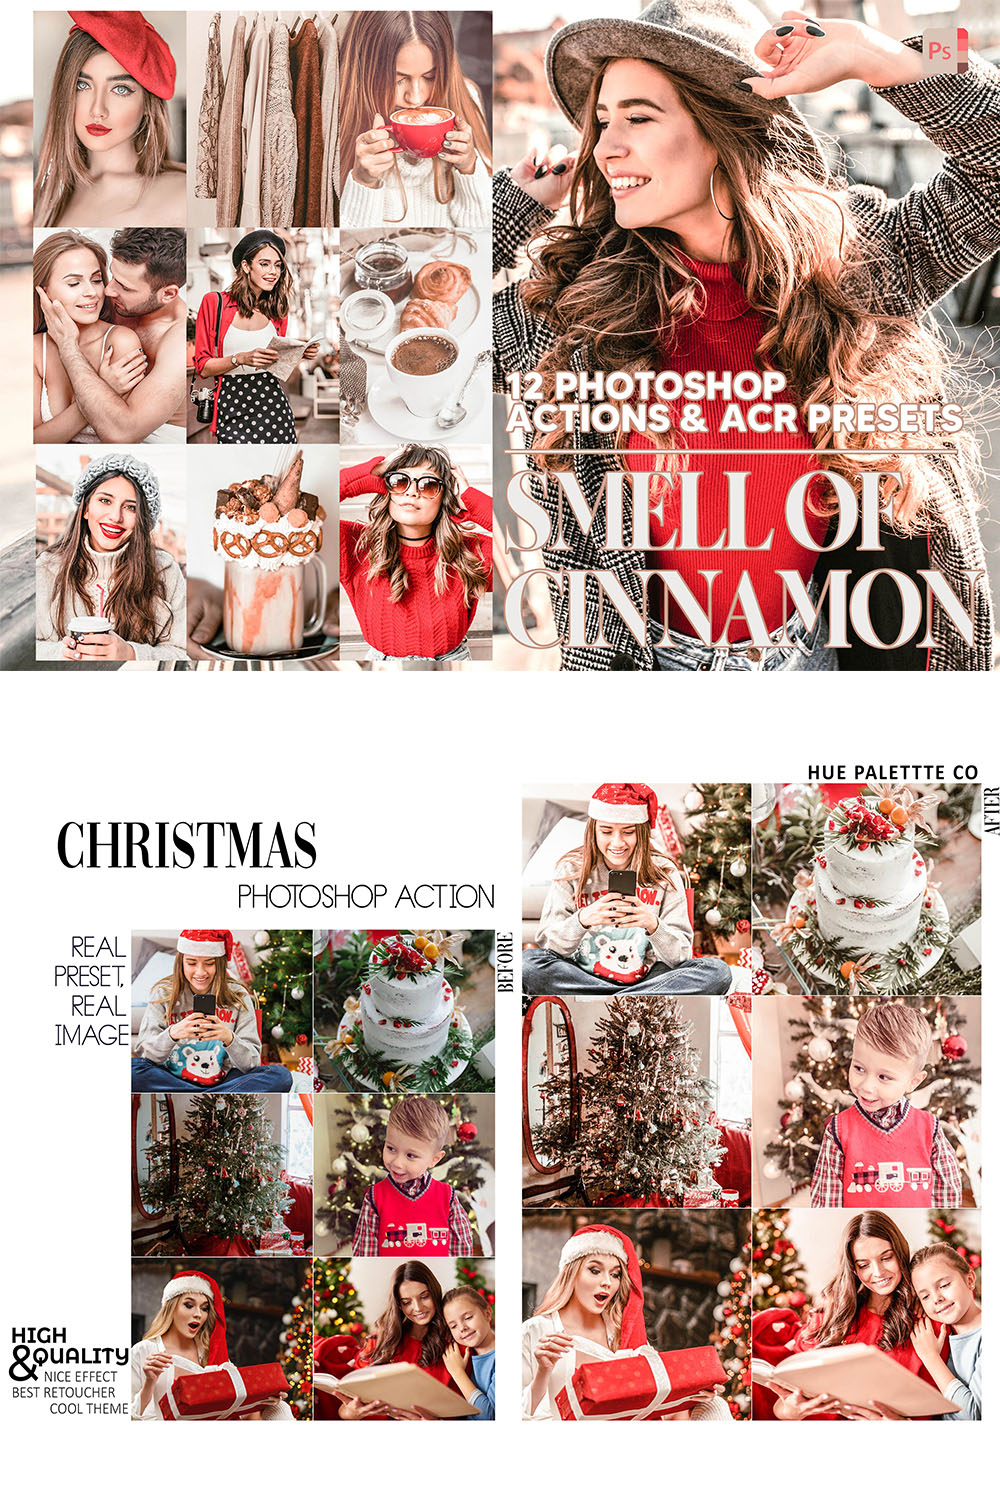 12 Photoshop Actions, Smell Of Cinnamon Ps Action, Winter ACR Preset, Love Ps Filter, Atn Portrait And Lifestyle Theme For Instagram, Blogger pinterest preview image.